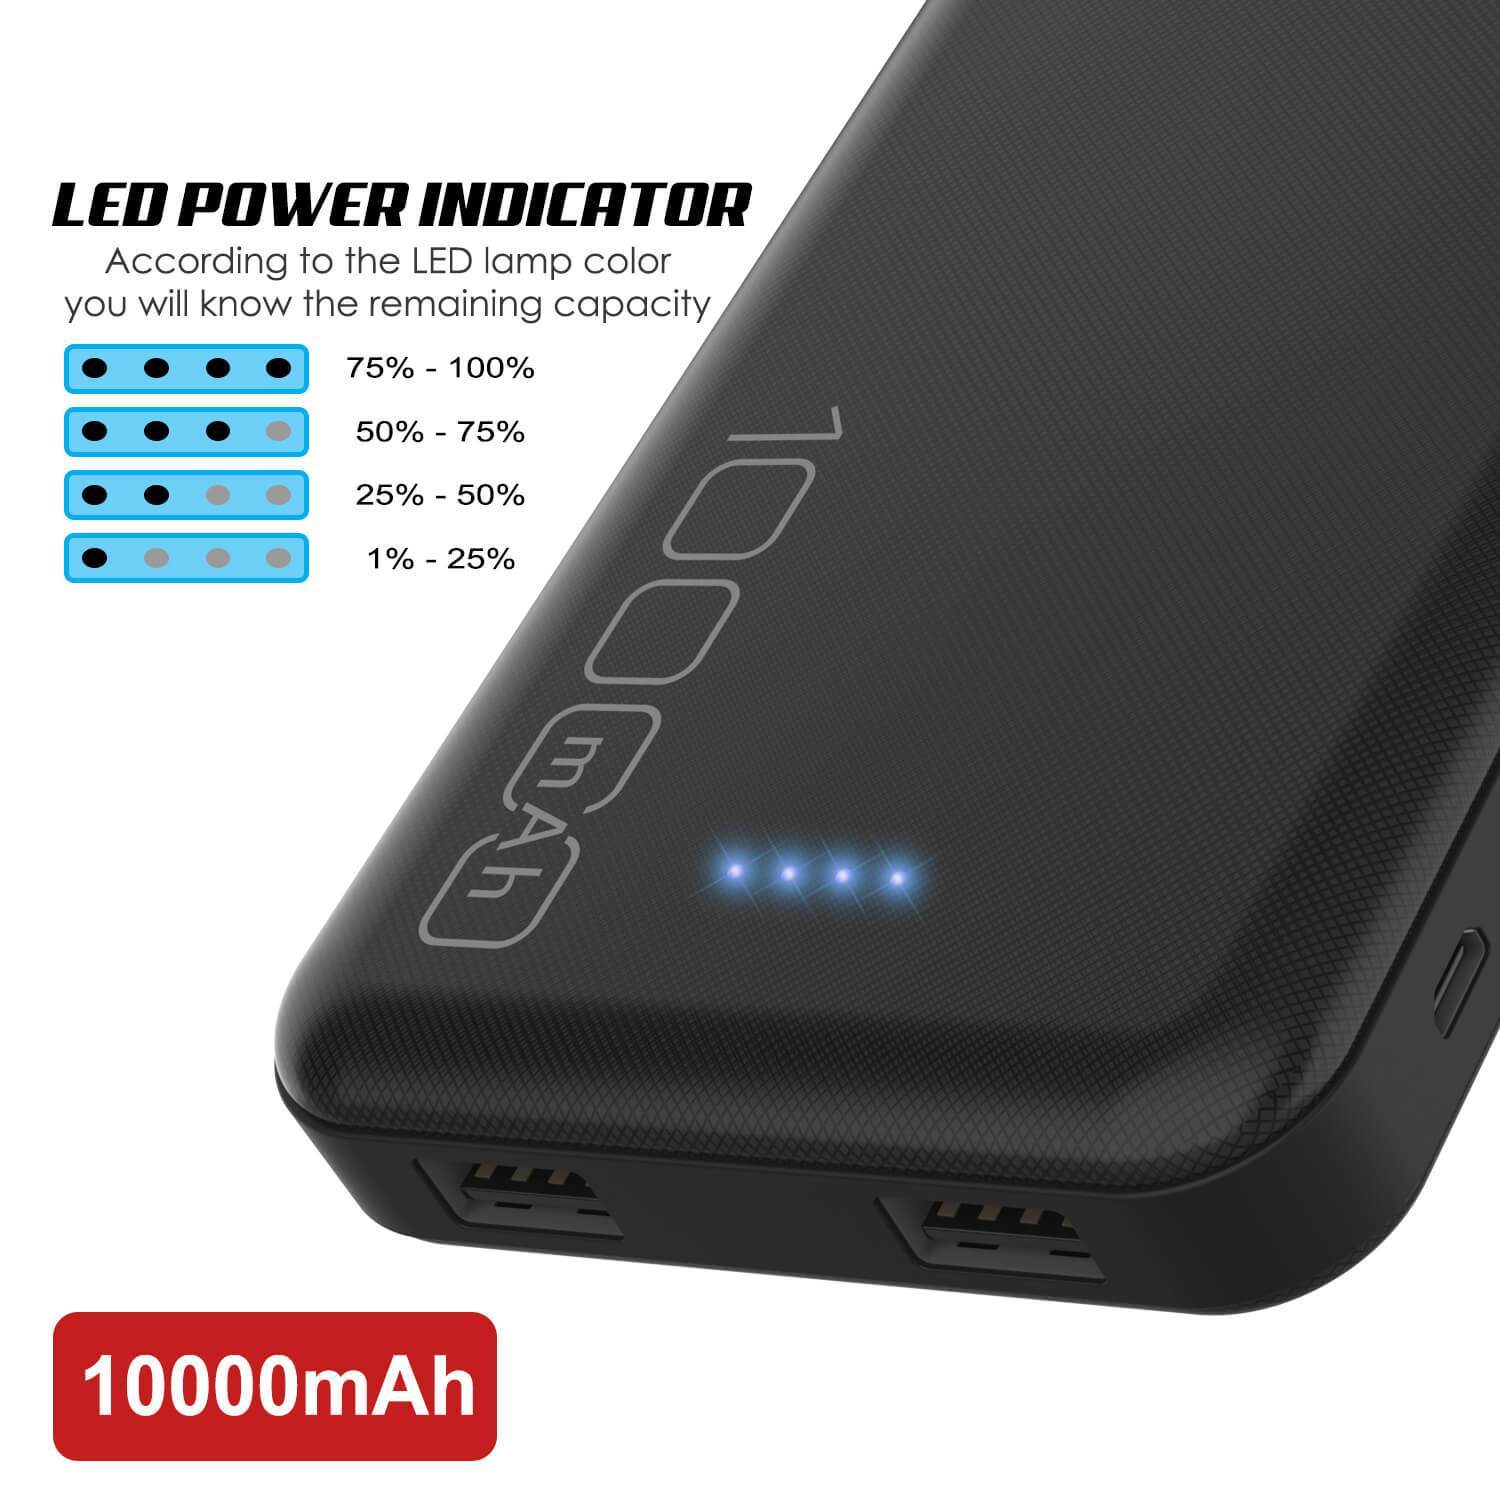 PunkCase PowerBank 10000mah Battery Pack for iPhone 13/12/122. iPad, Samsung Galaxy S22/ S21/ S20/ S10/ S9 and Many More [Black]